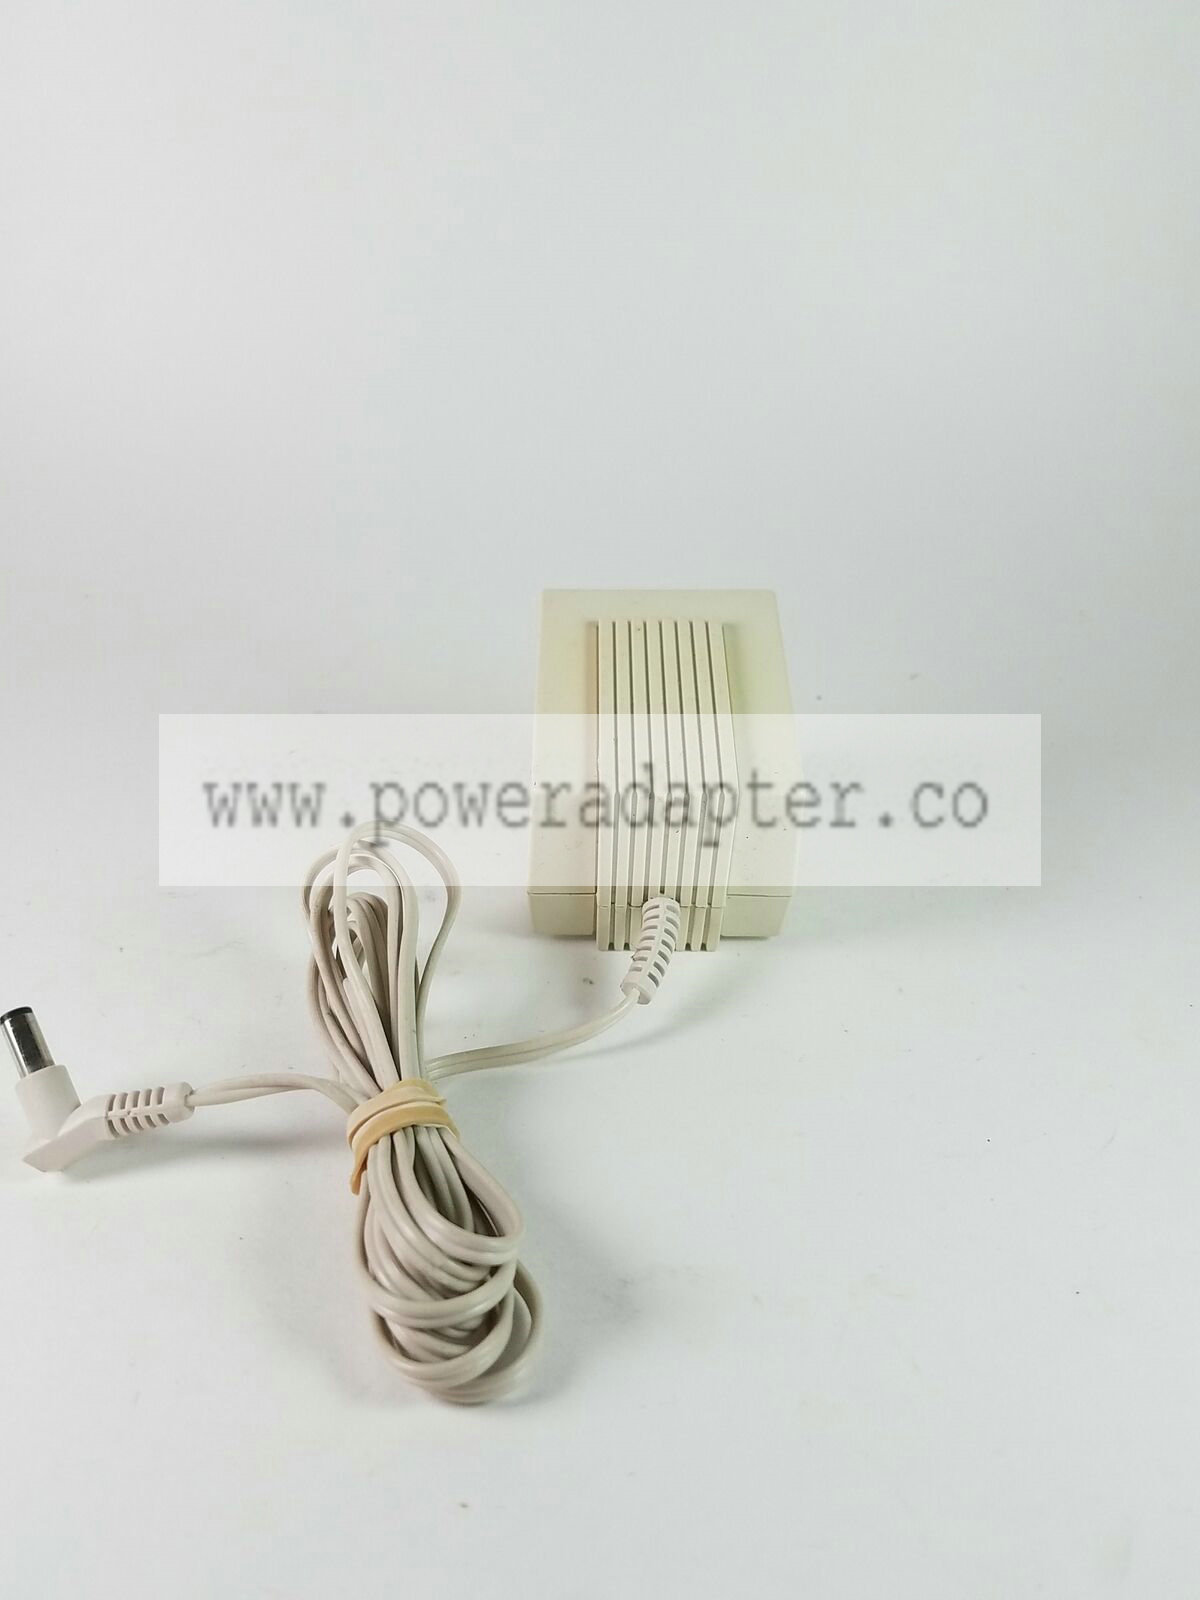 Telephone AC Power Supply Adapter Class 2 Model No. HAAW-1 9VAC 900mA MPN: HAAW-1 Output Current: 900mA Brand: unbra - Click Image to Close